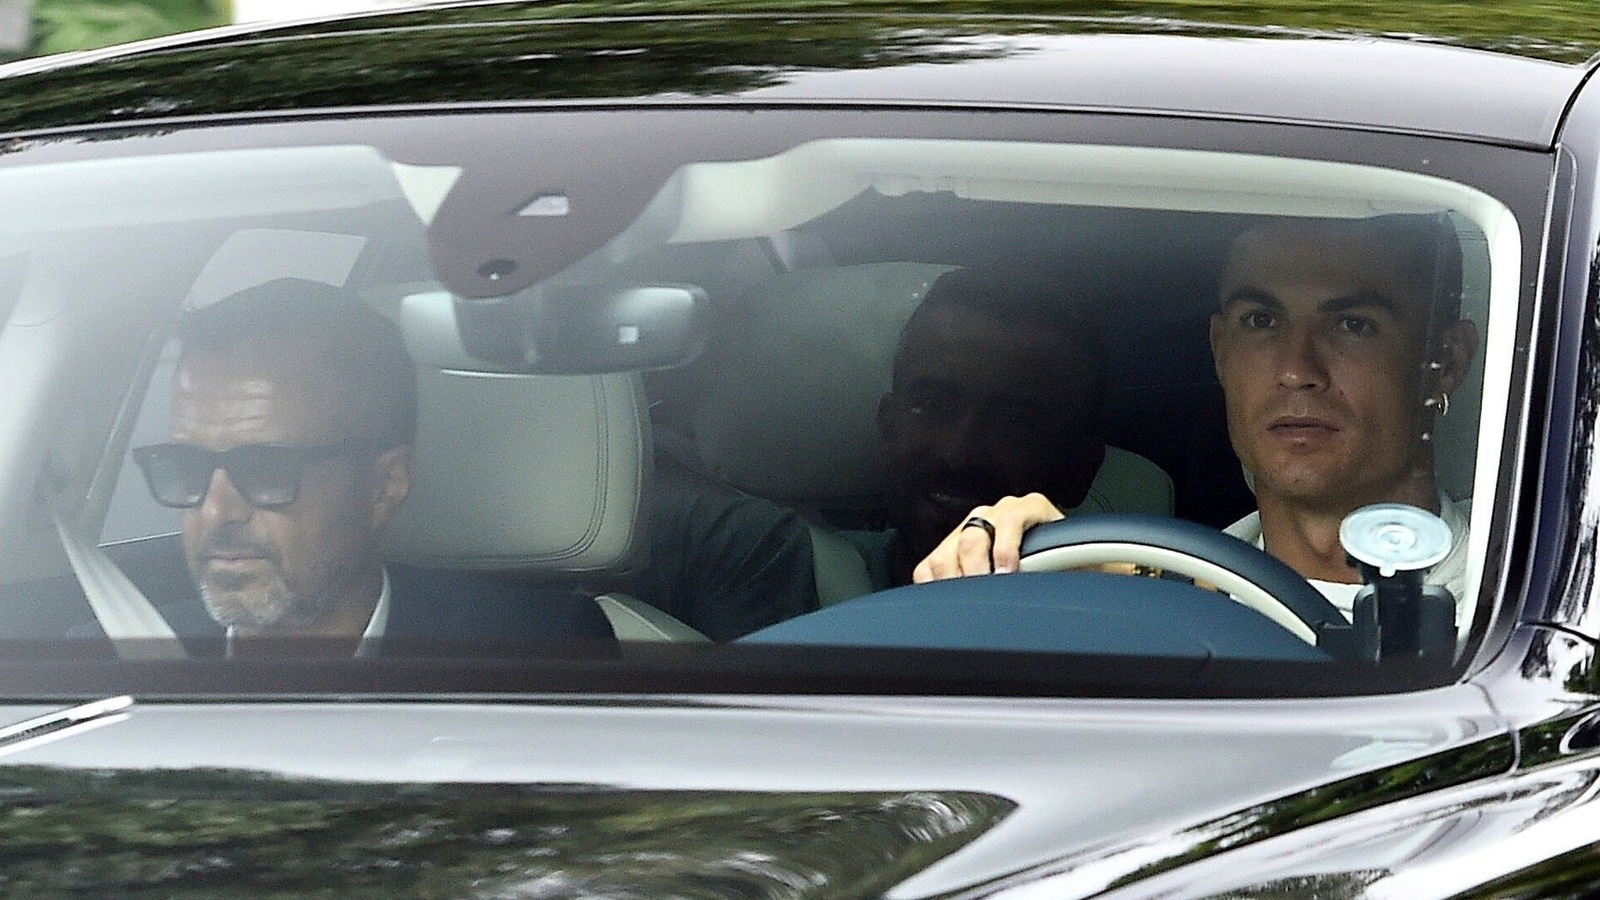 Cristiano Ronaldo arrives for showdown talks with Manchester United amid ongoing transfer saga. See pics